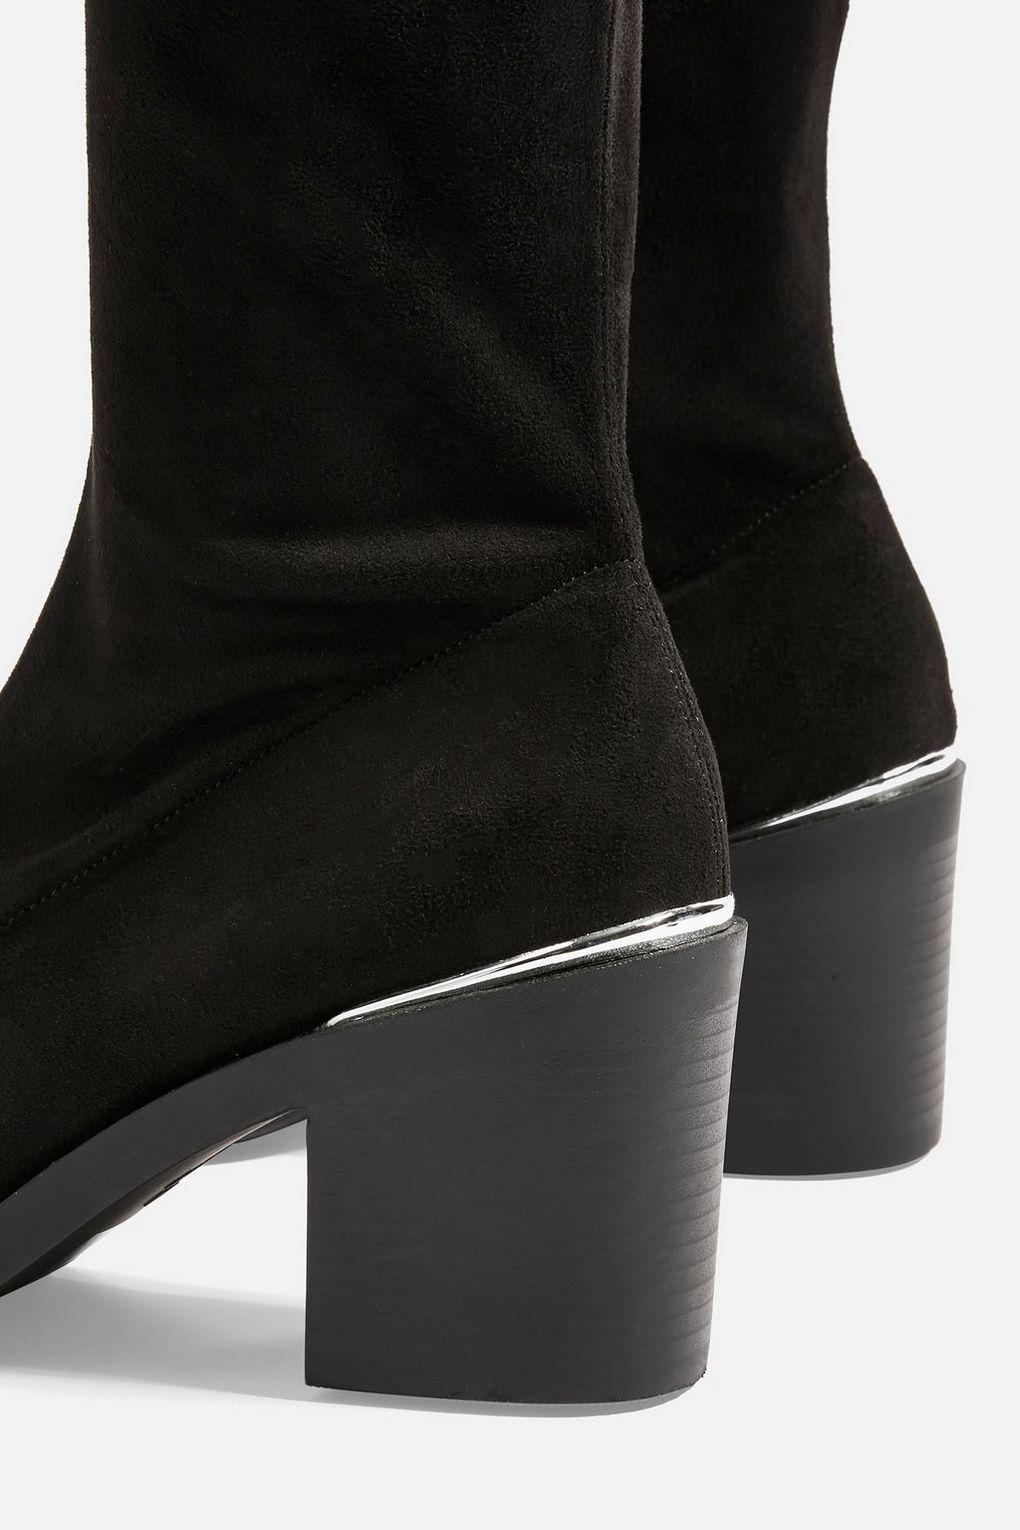 topshop bailey boots Off 52% - pizza-rg91.fr